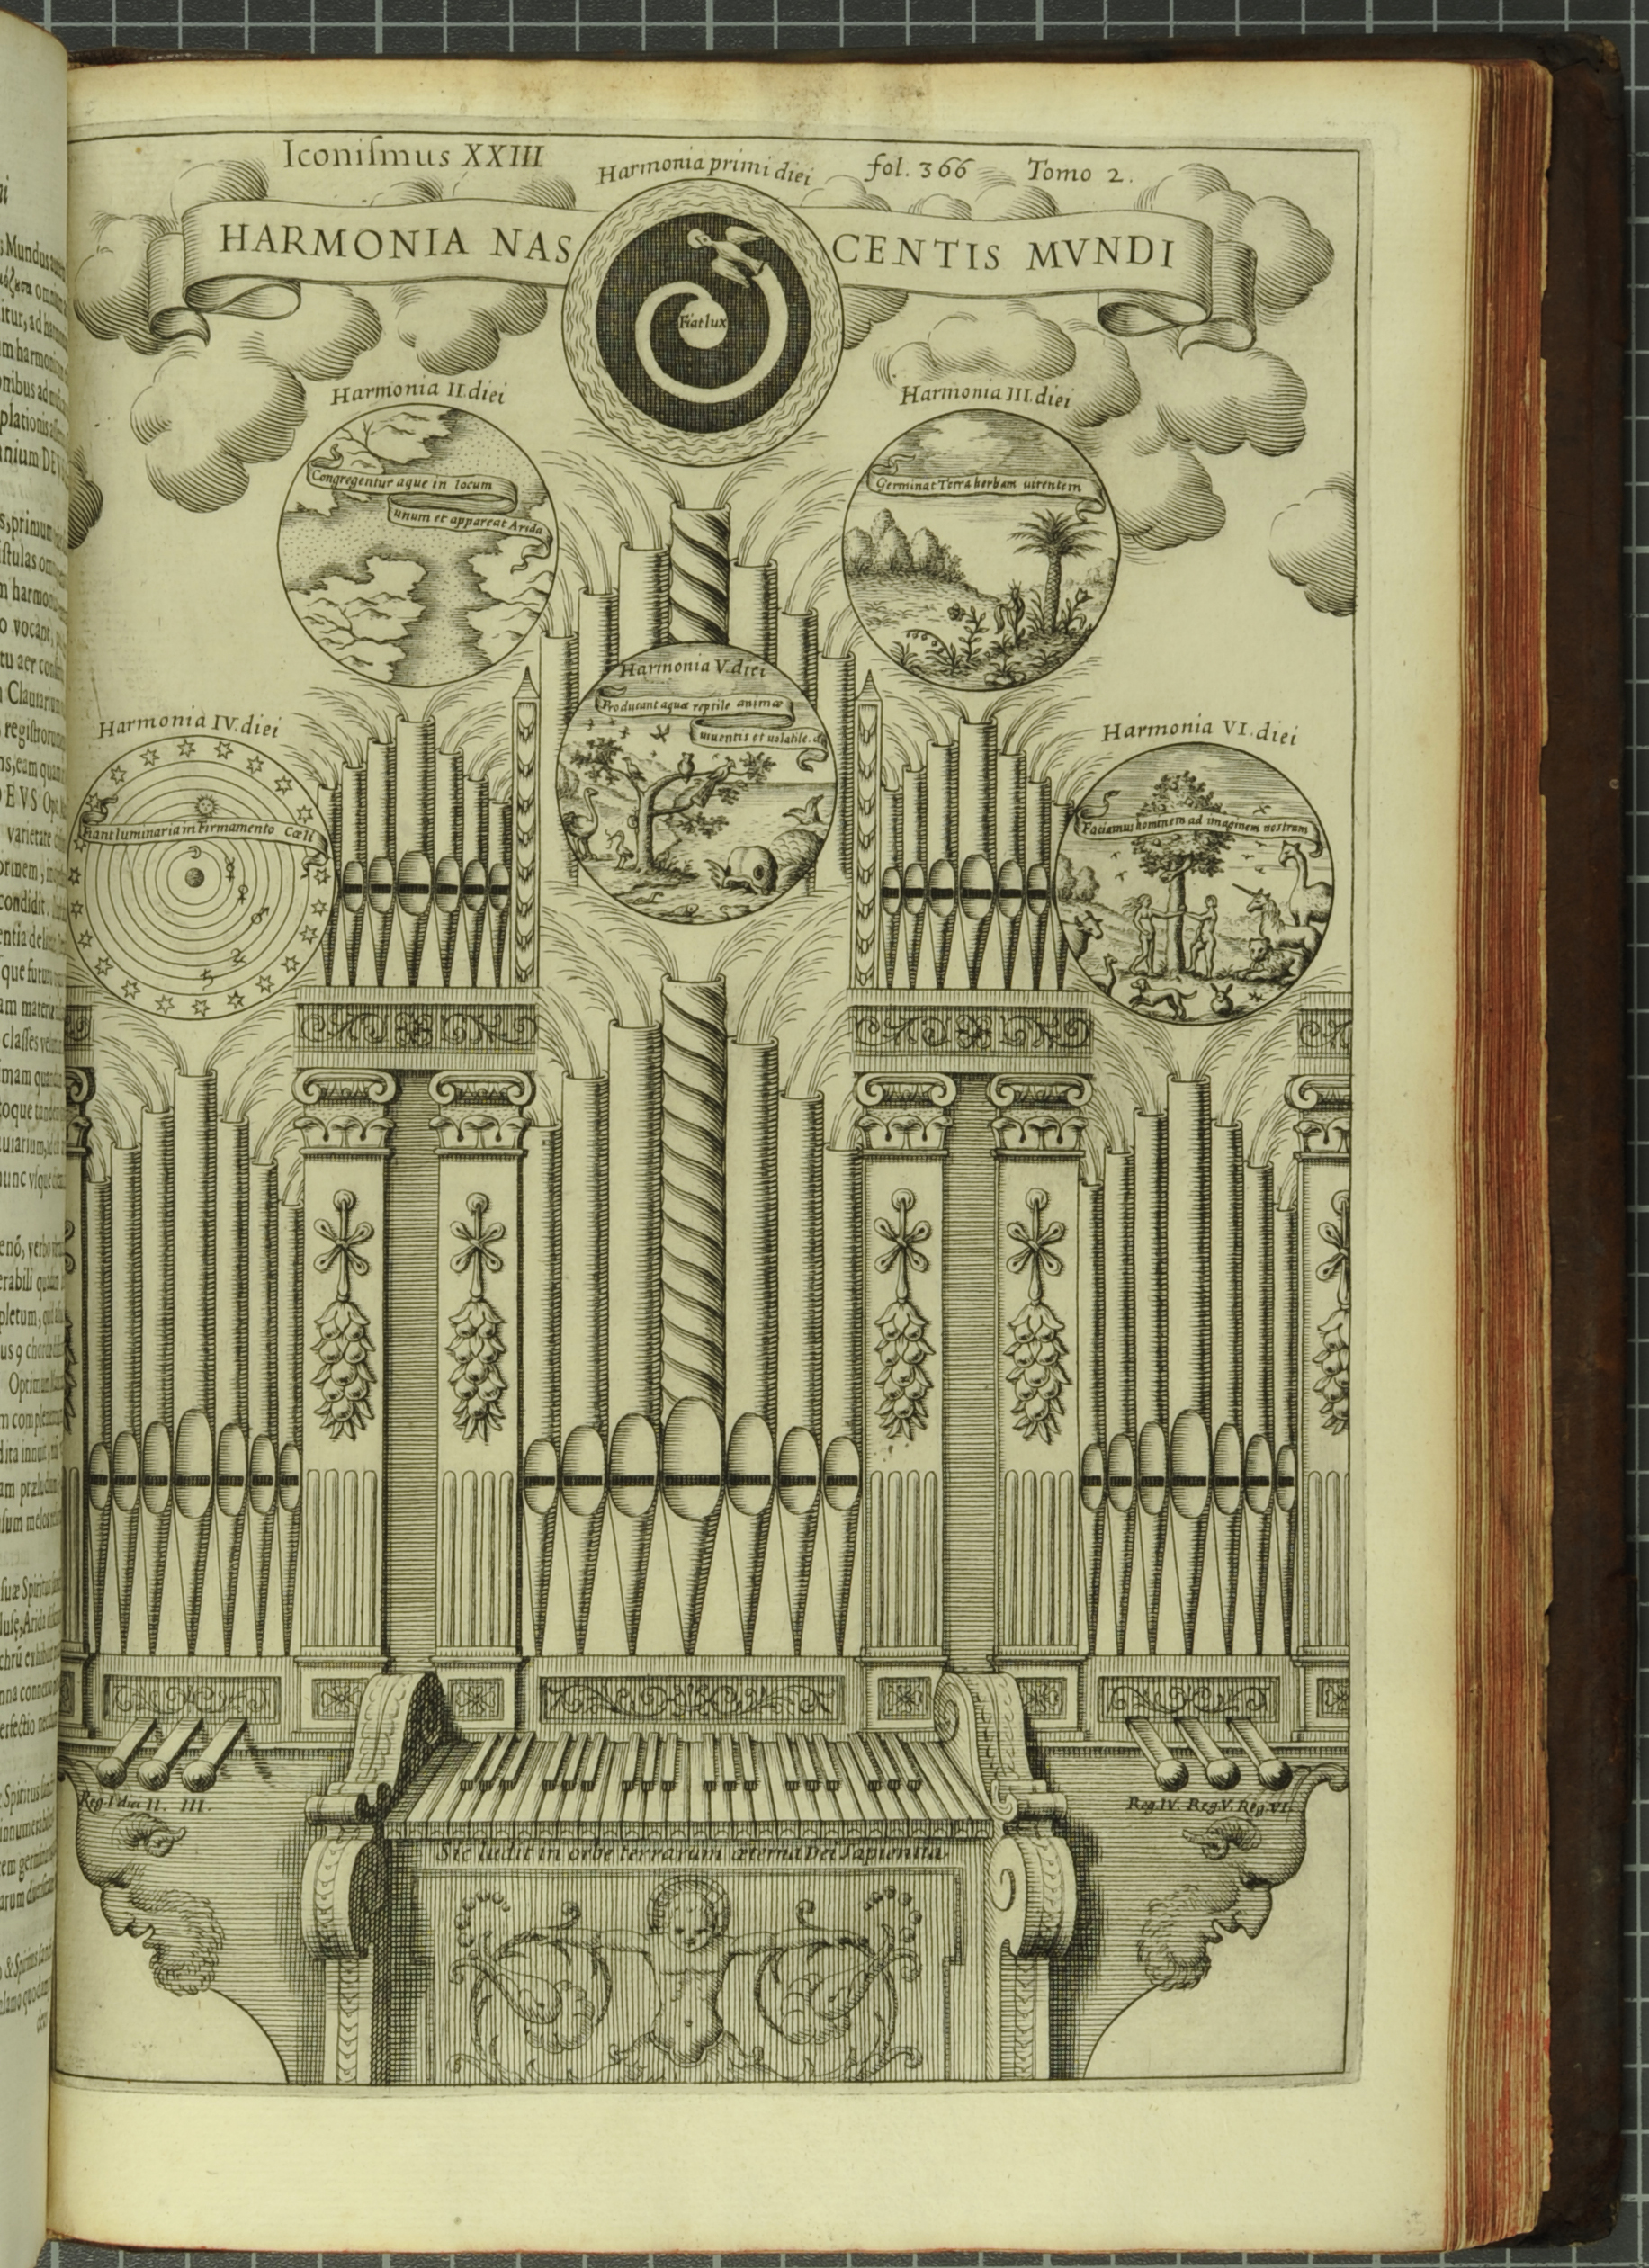 A depiction of Kircher's ideal of musical harmony: 'The Harmony of the Birth of the World' (Harmonia Nascentis Mundi), represented by a cosmic organ with six registers corresponding to the days of creation. The legend "Sic ludit in orbe terrarum aeterna Dei Sapientia"  (thus plays the wisdom of the everlasting God in the earthly orb) appears under the keyboard. (St Andrews copy r17f ML3805.K5M8)